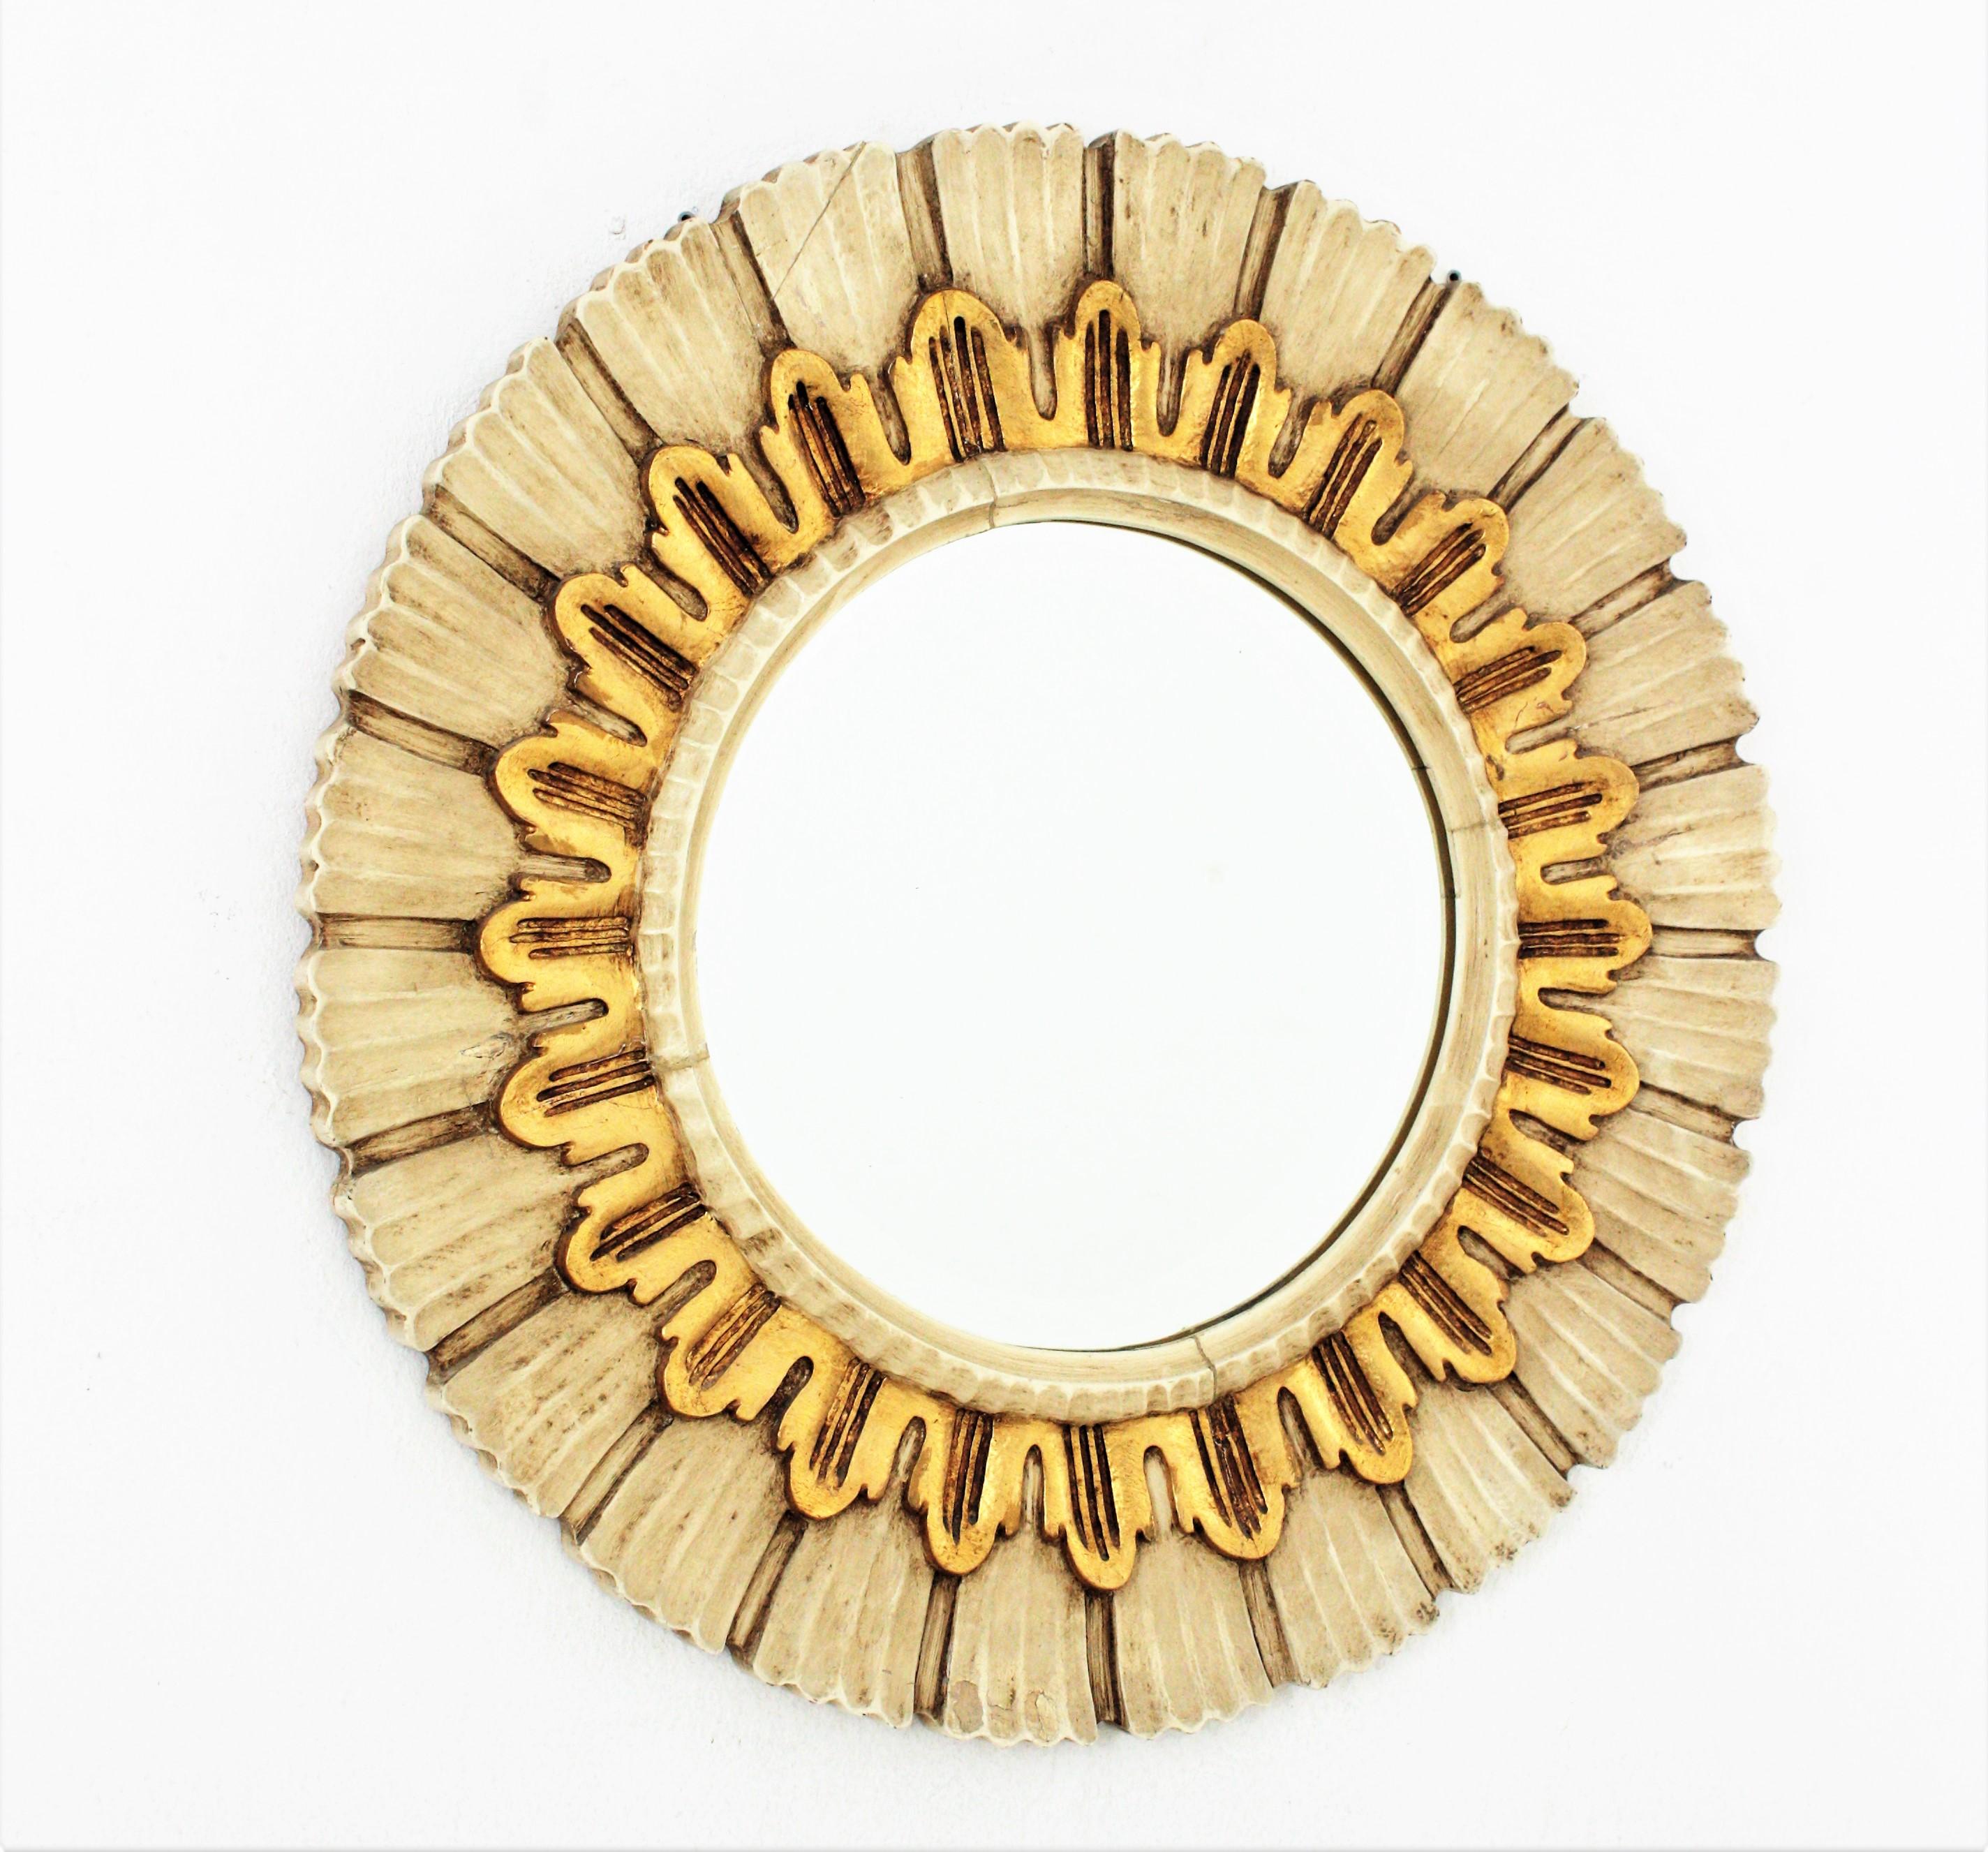 Eye-catching carved and gilded wood round sunburst mirror with beige and gilded wooden frame.Spain, 1960s.
Carved wood and gold leaf gilding. The beige patinated frame has striped carving details and a layer of giltwood surrounding the glass. The